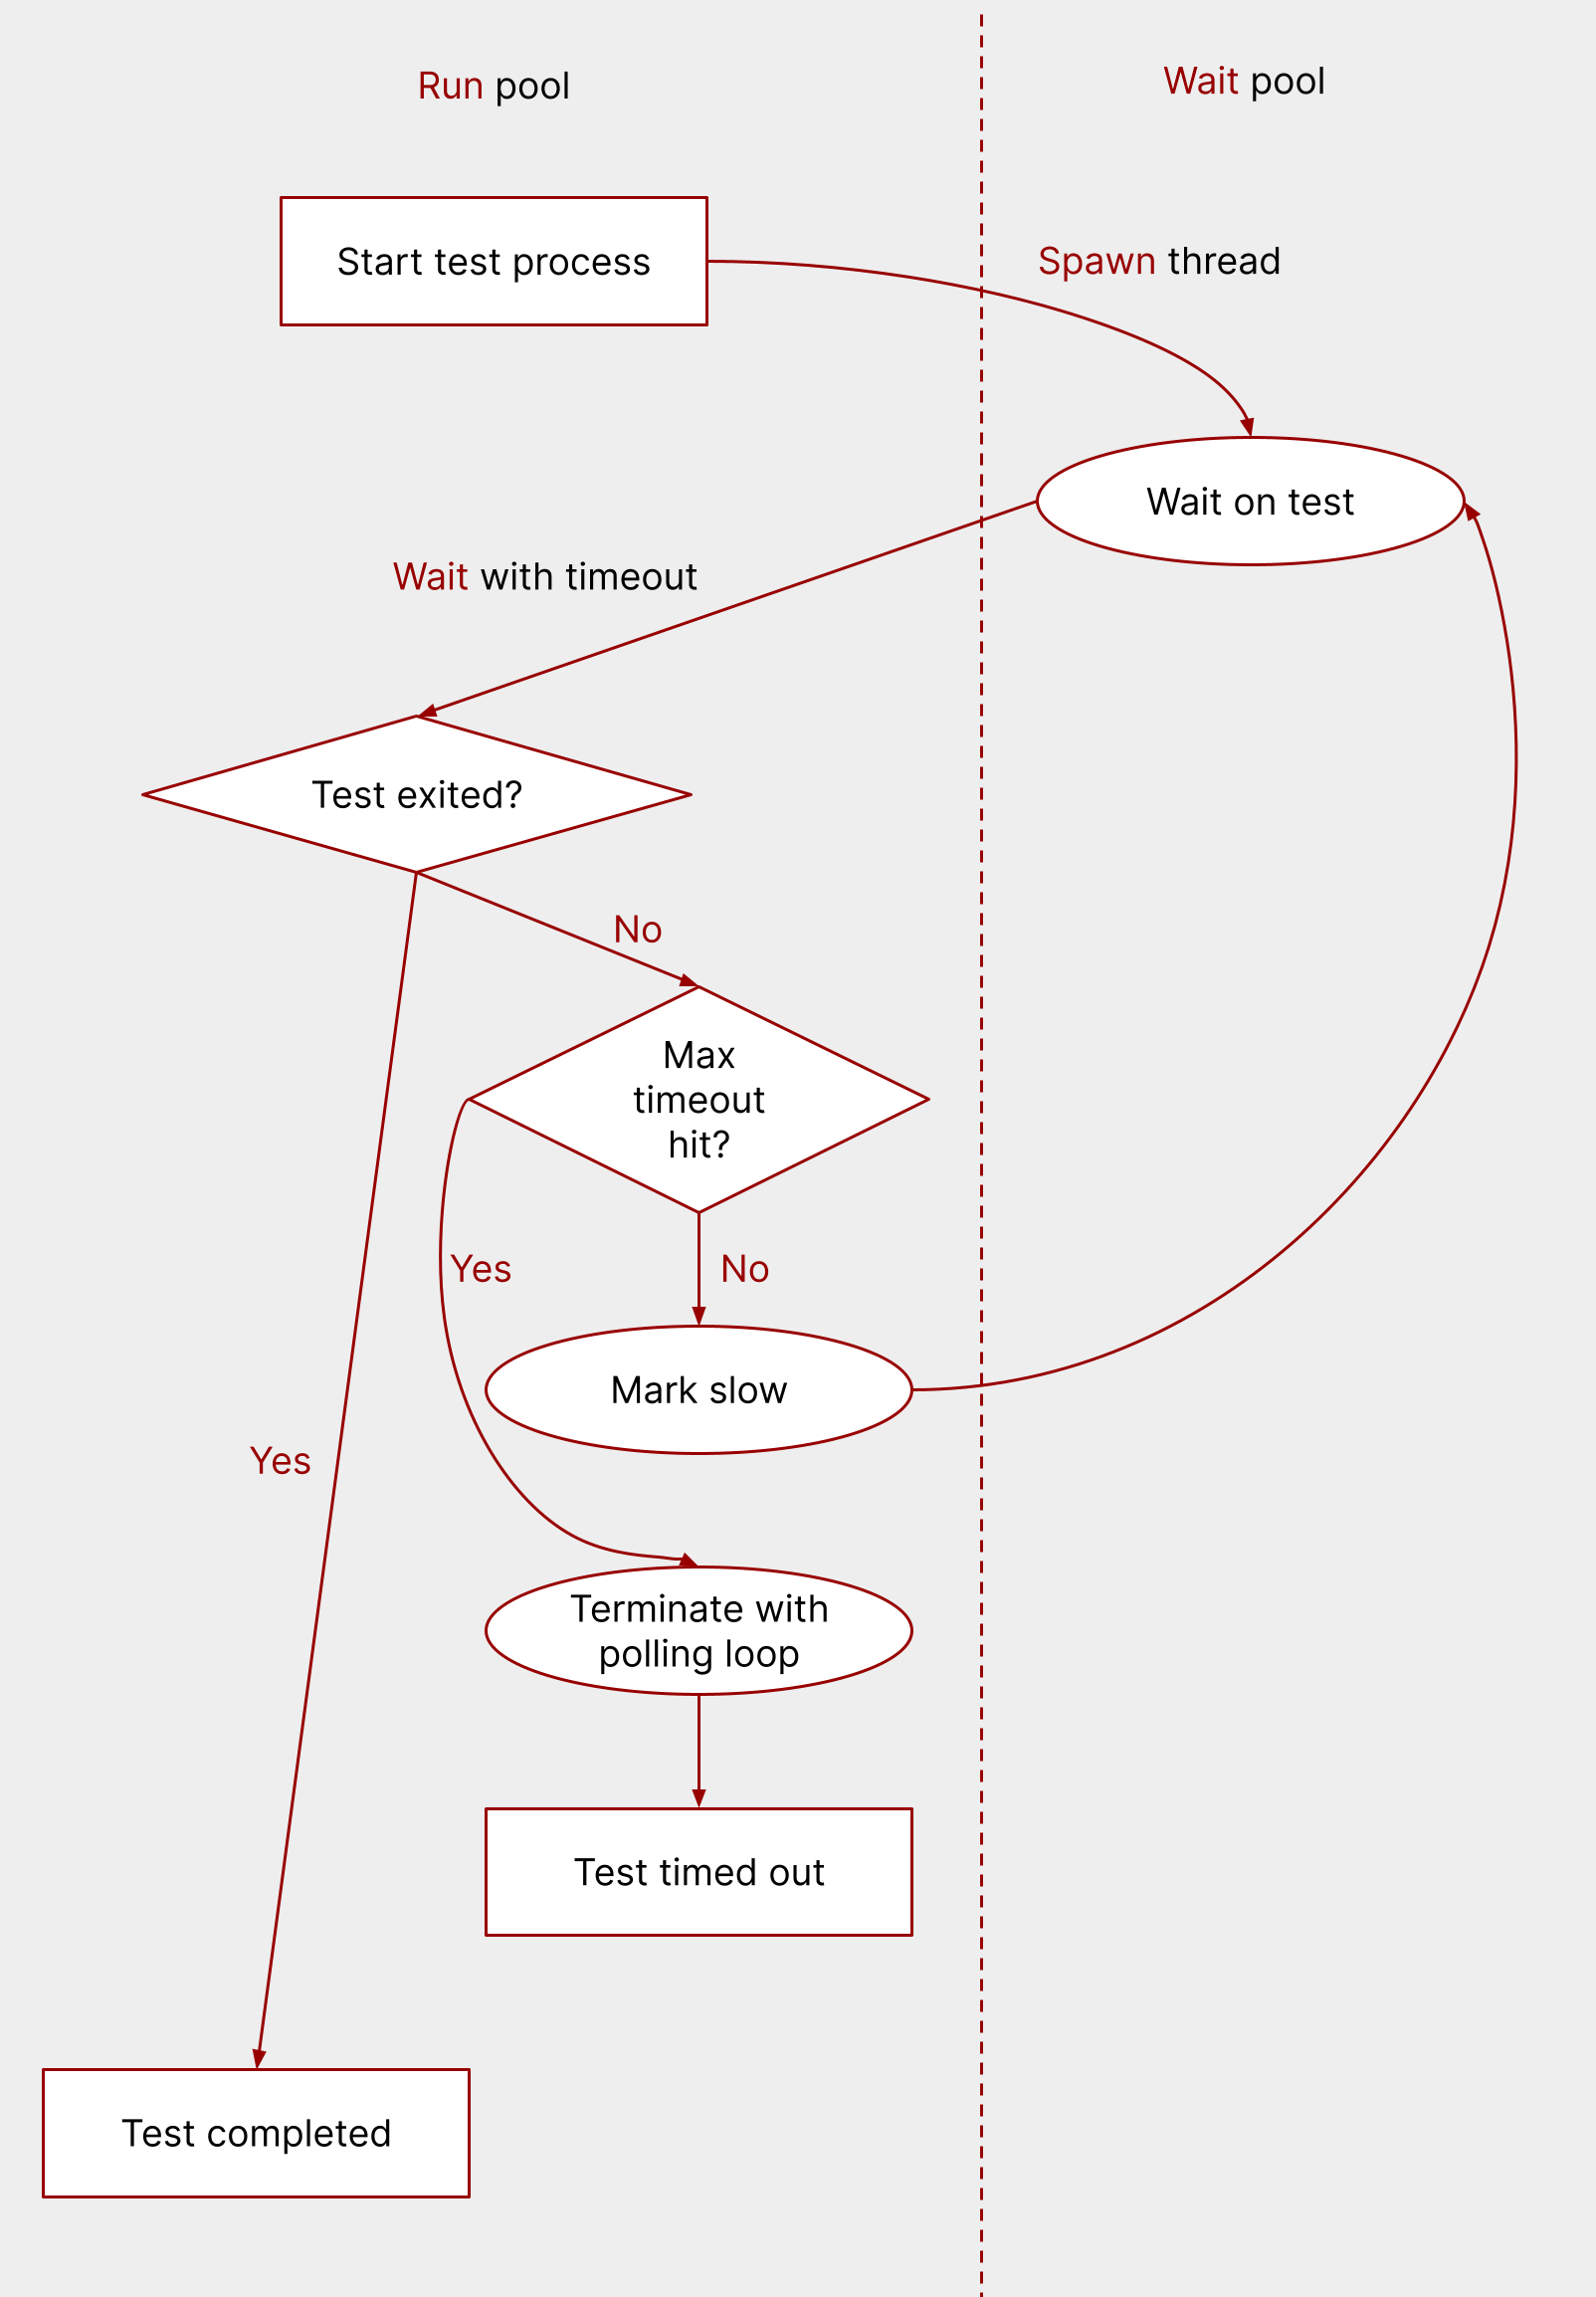 A flowchart to show how nextest's runner loop implemented test timeouts. See below for text description.